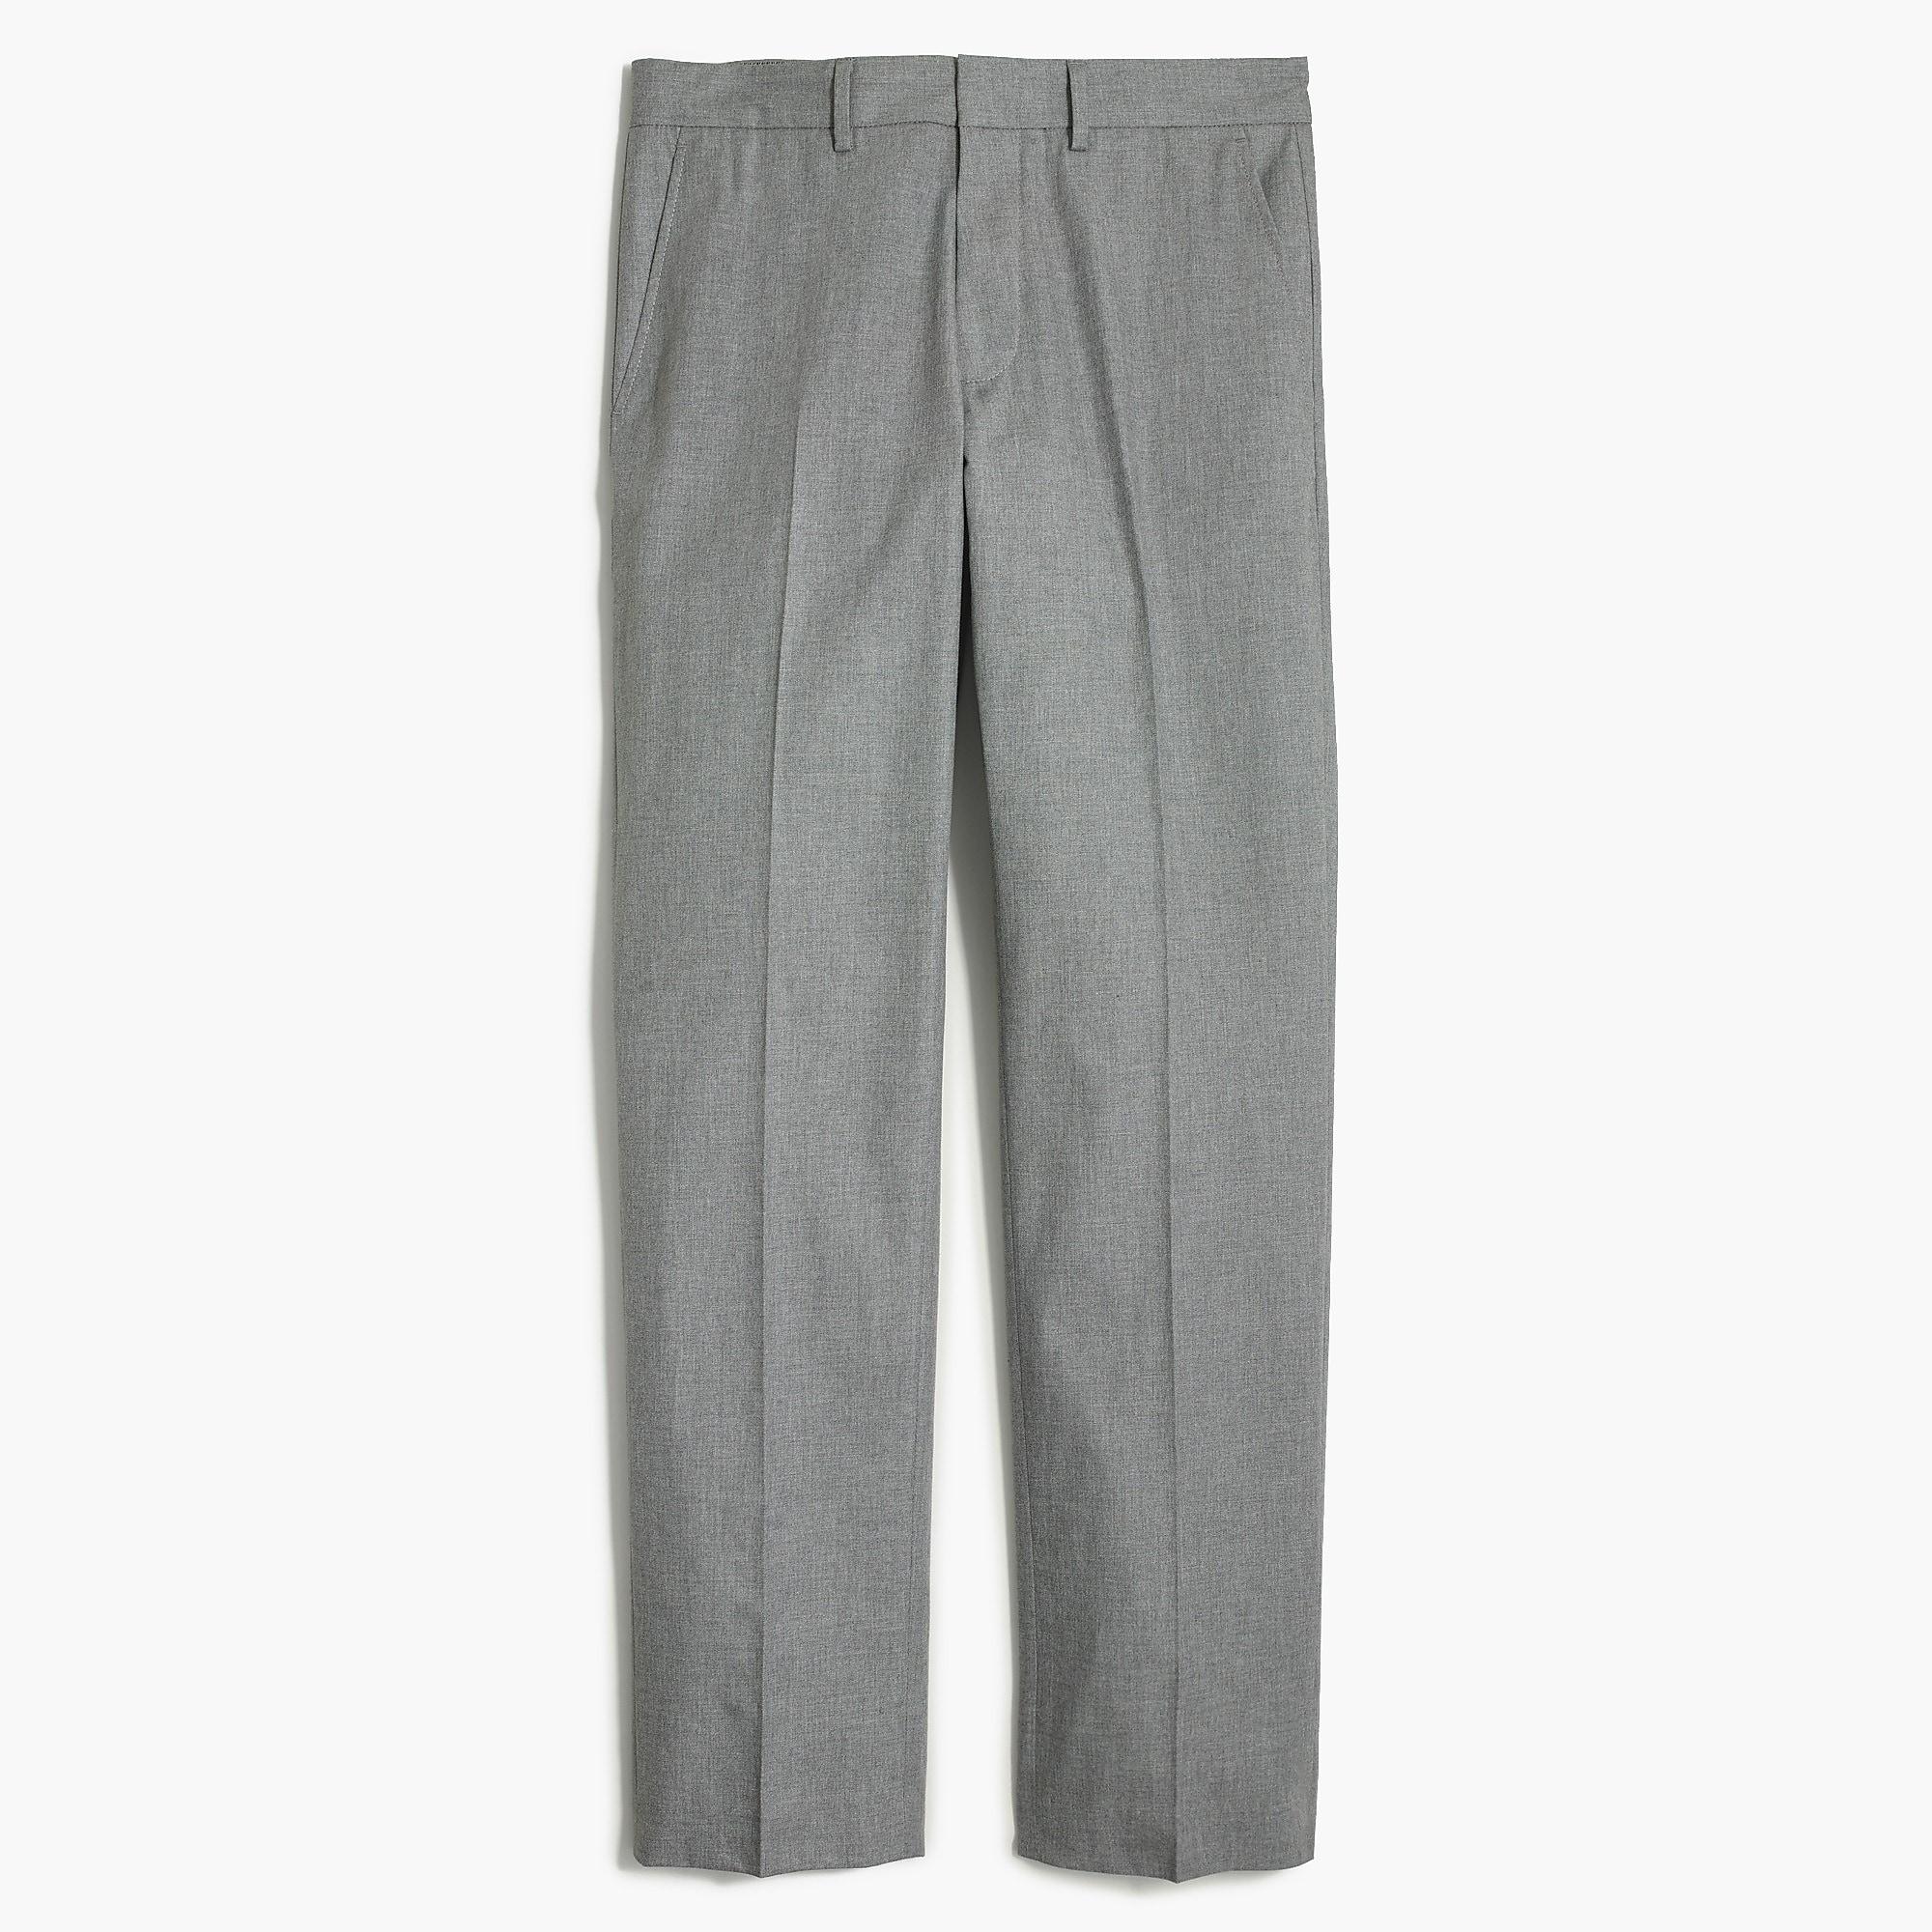 J.Crew Bedford Dress Pant In Heathered Cotton in Gray for Men - Lyst